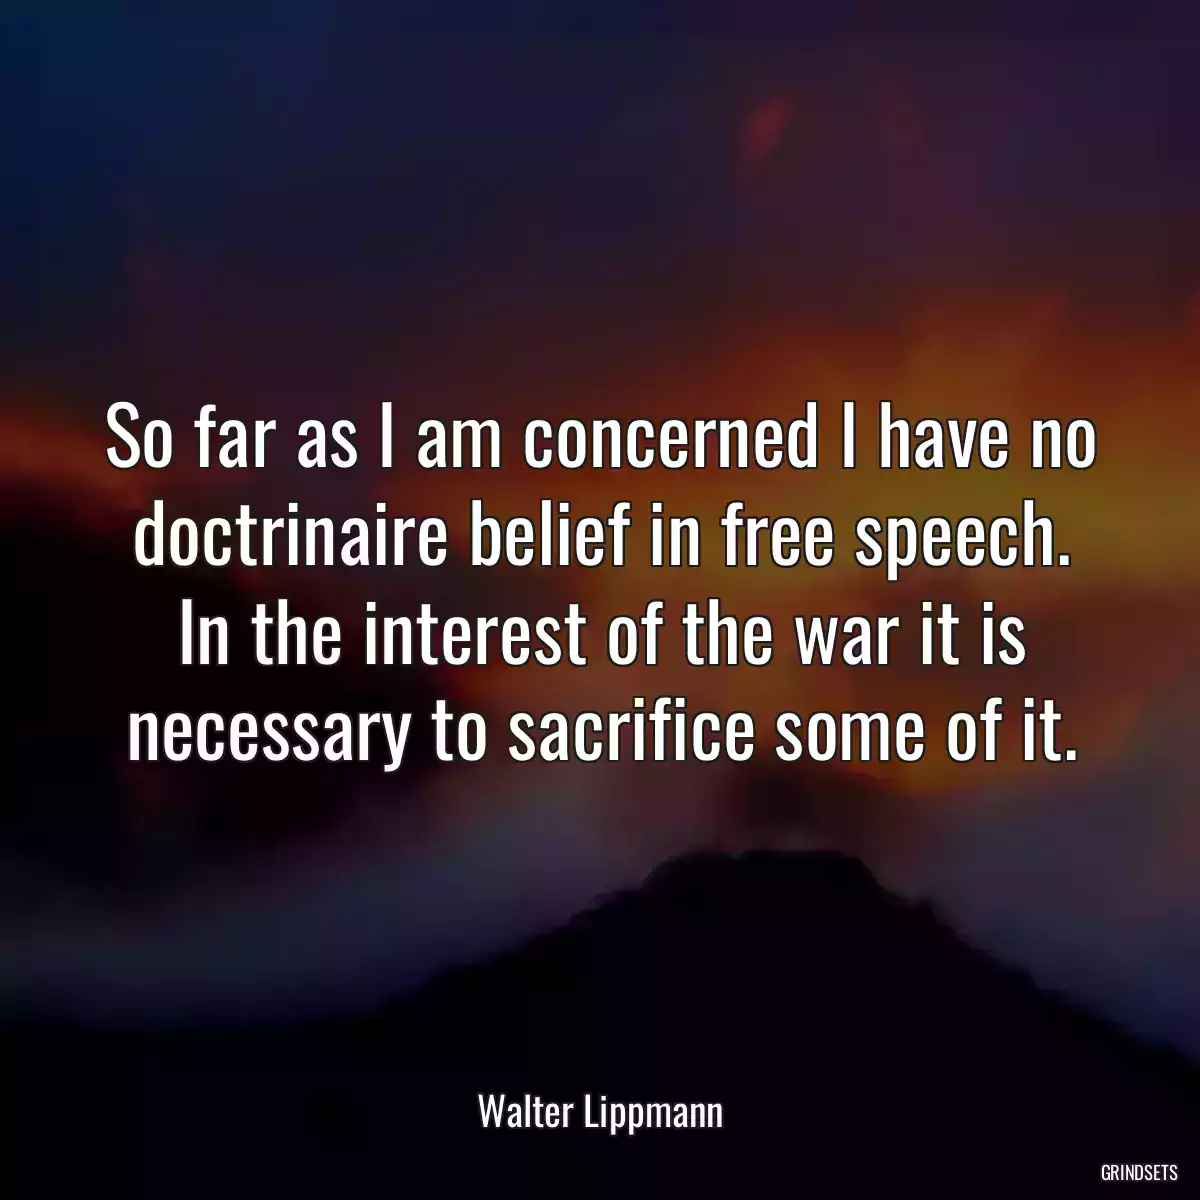 So far as I am concerned I have no doctrinaire belief in free speech. In the interest of the war it is necessary to sacrifice some of it.